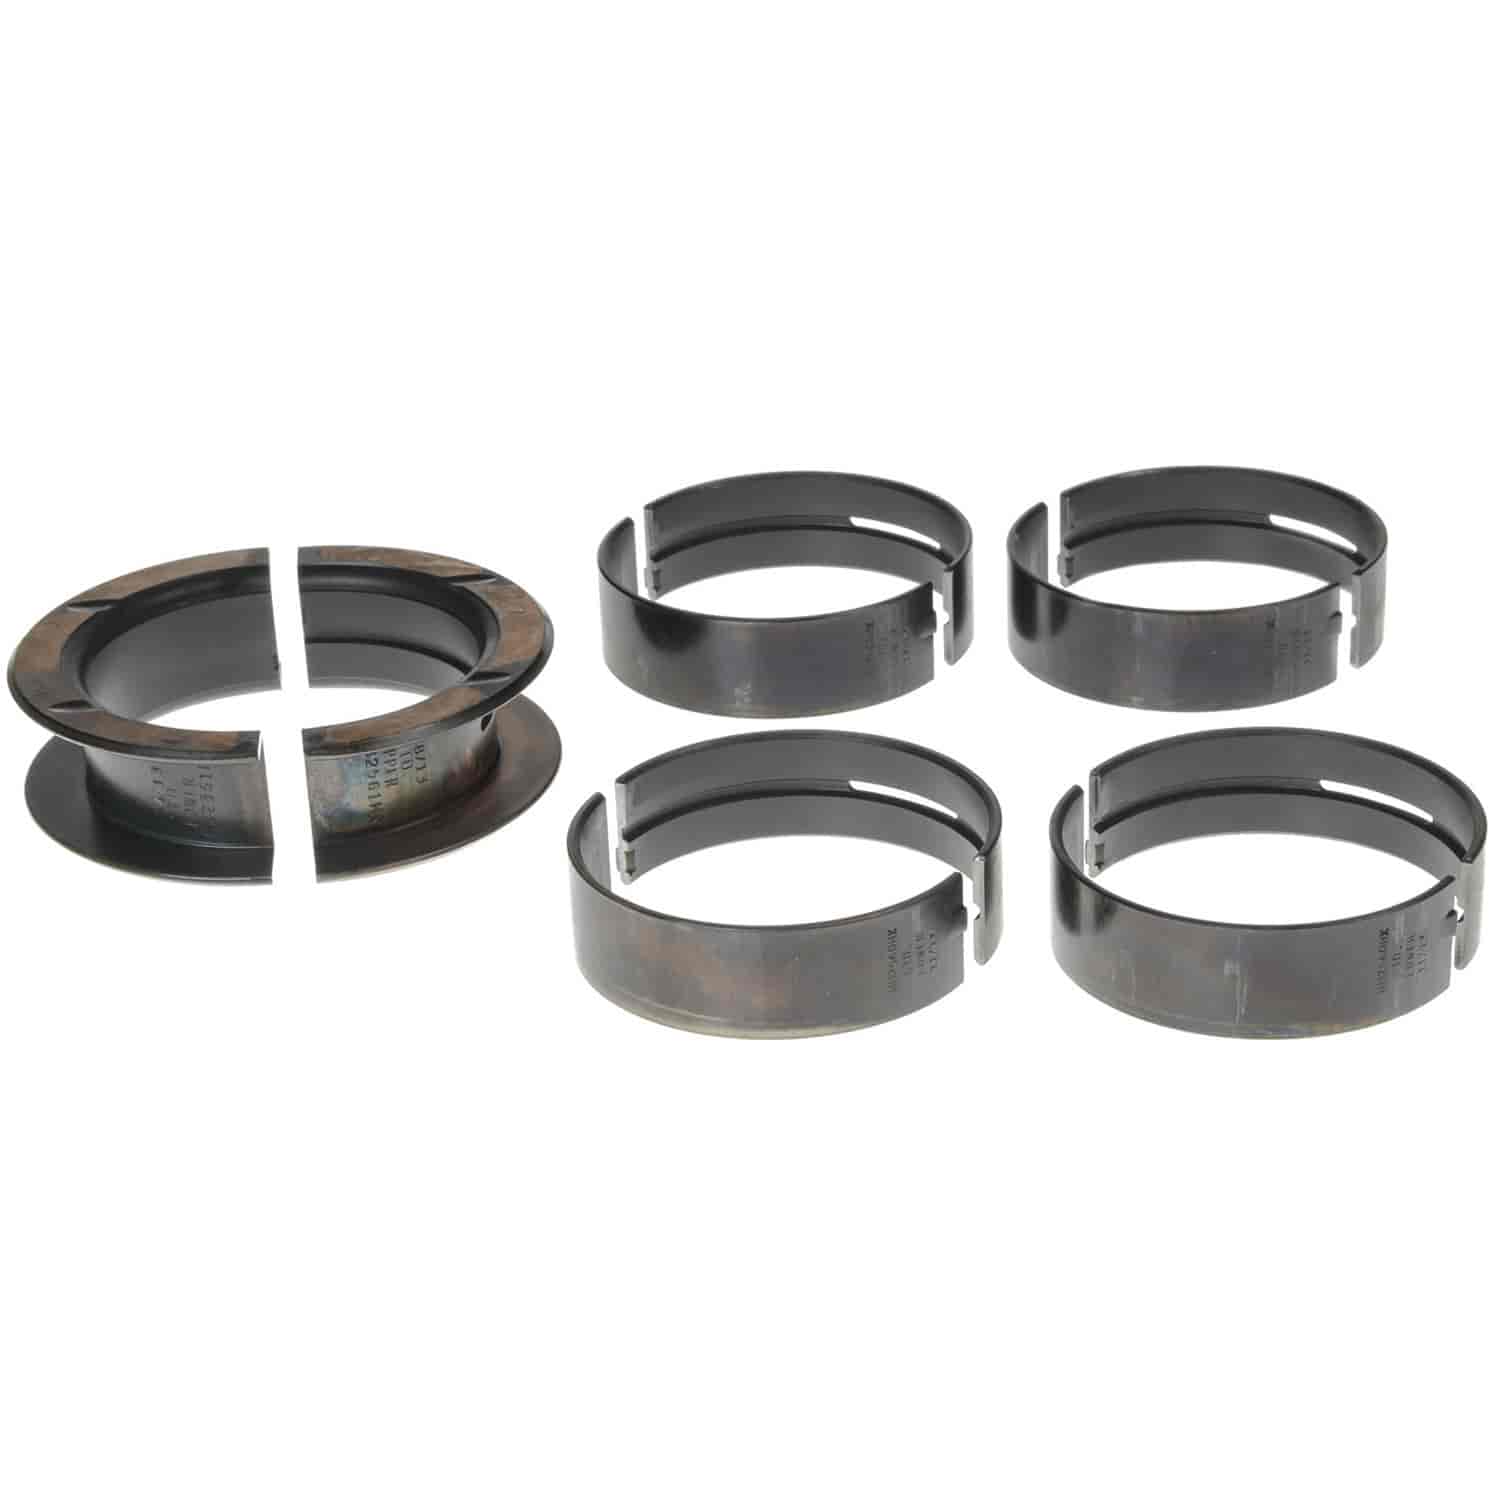 Main Bearing Set Ford 1969-1974 V8 351C (5.8L) with -.001" Undersize